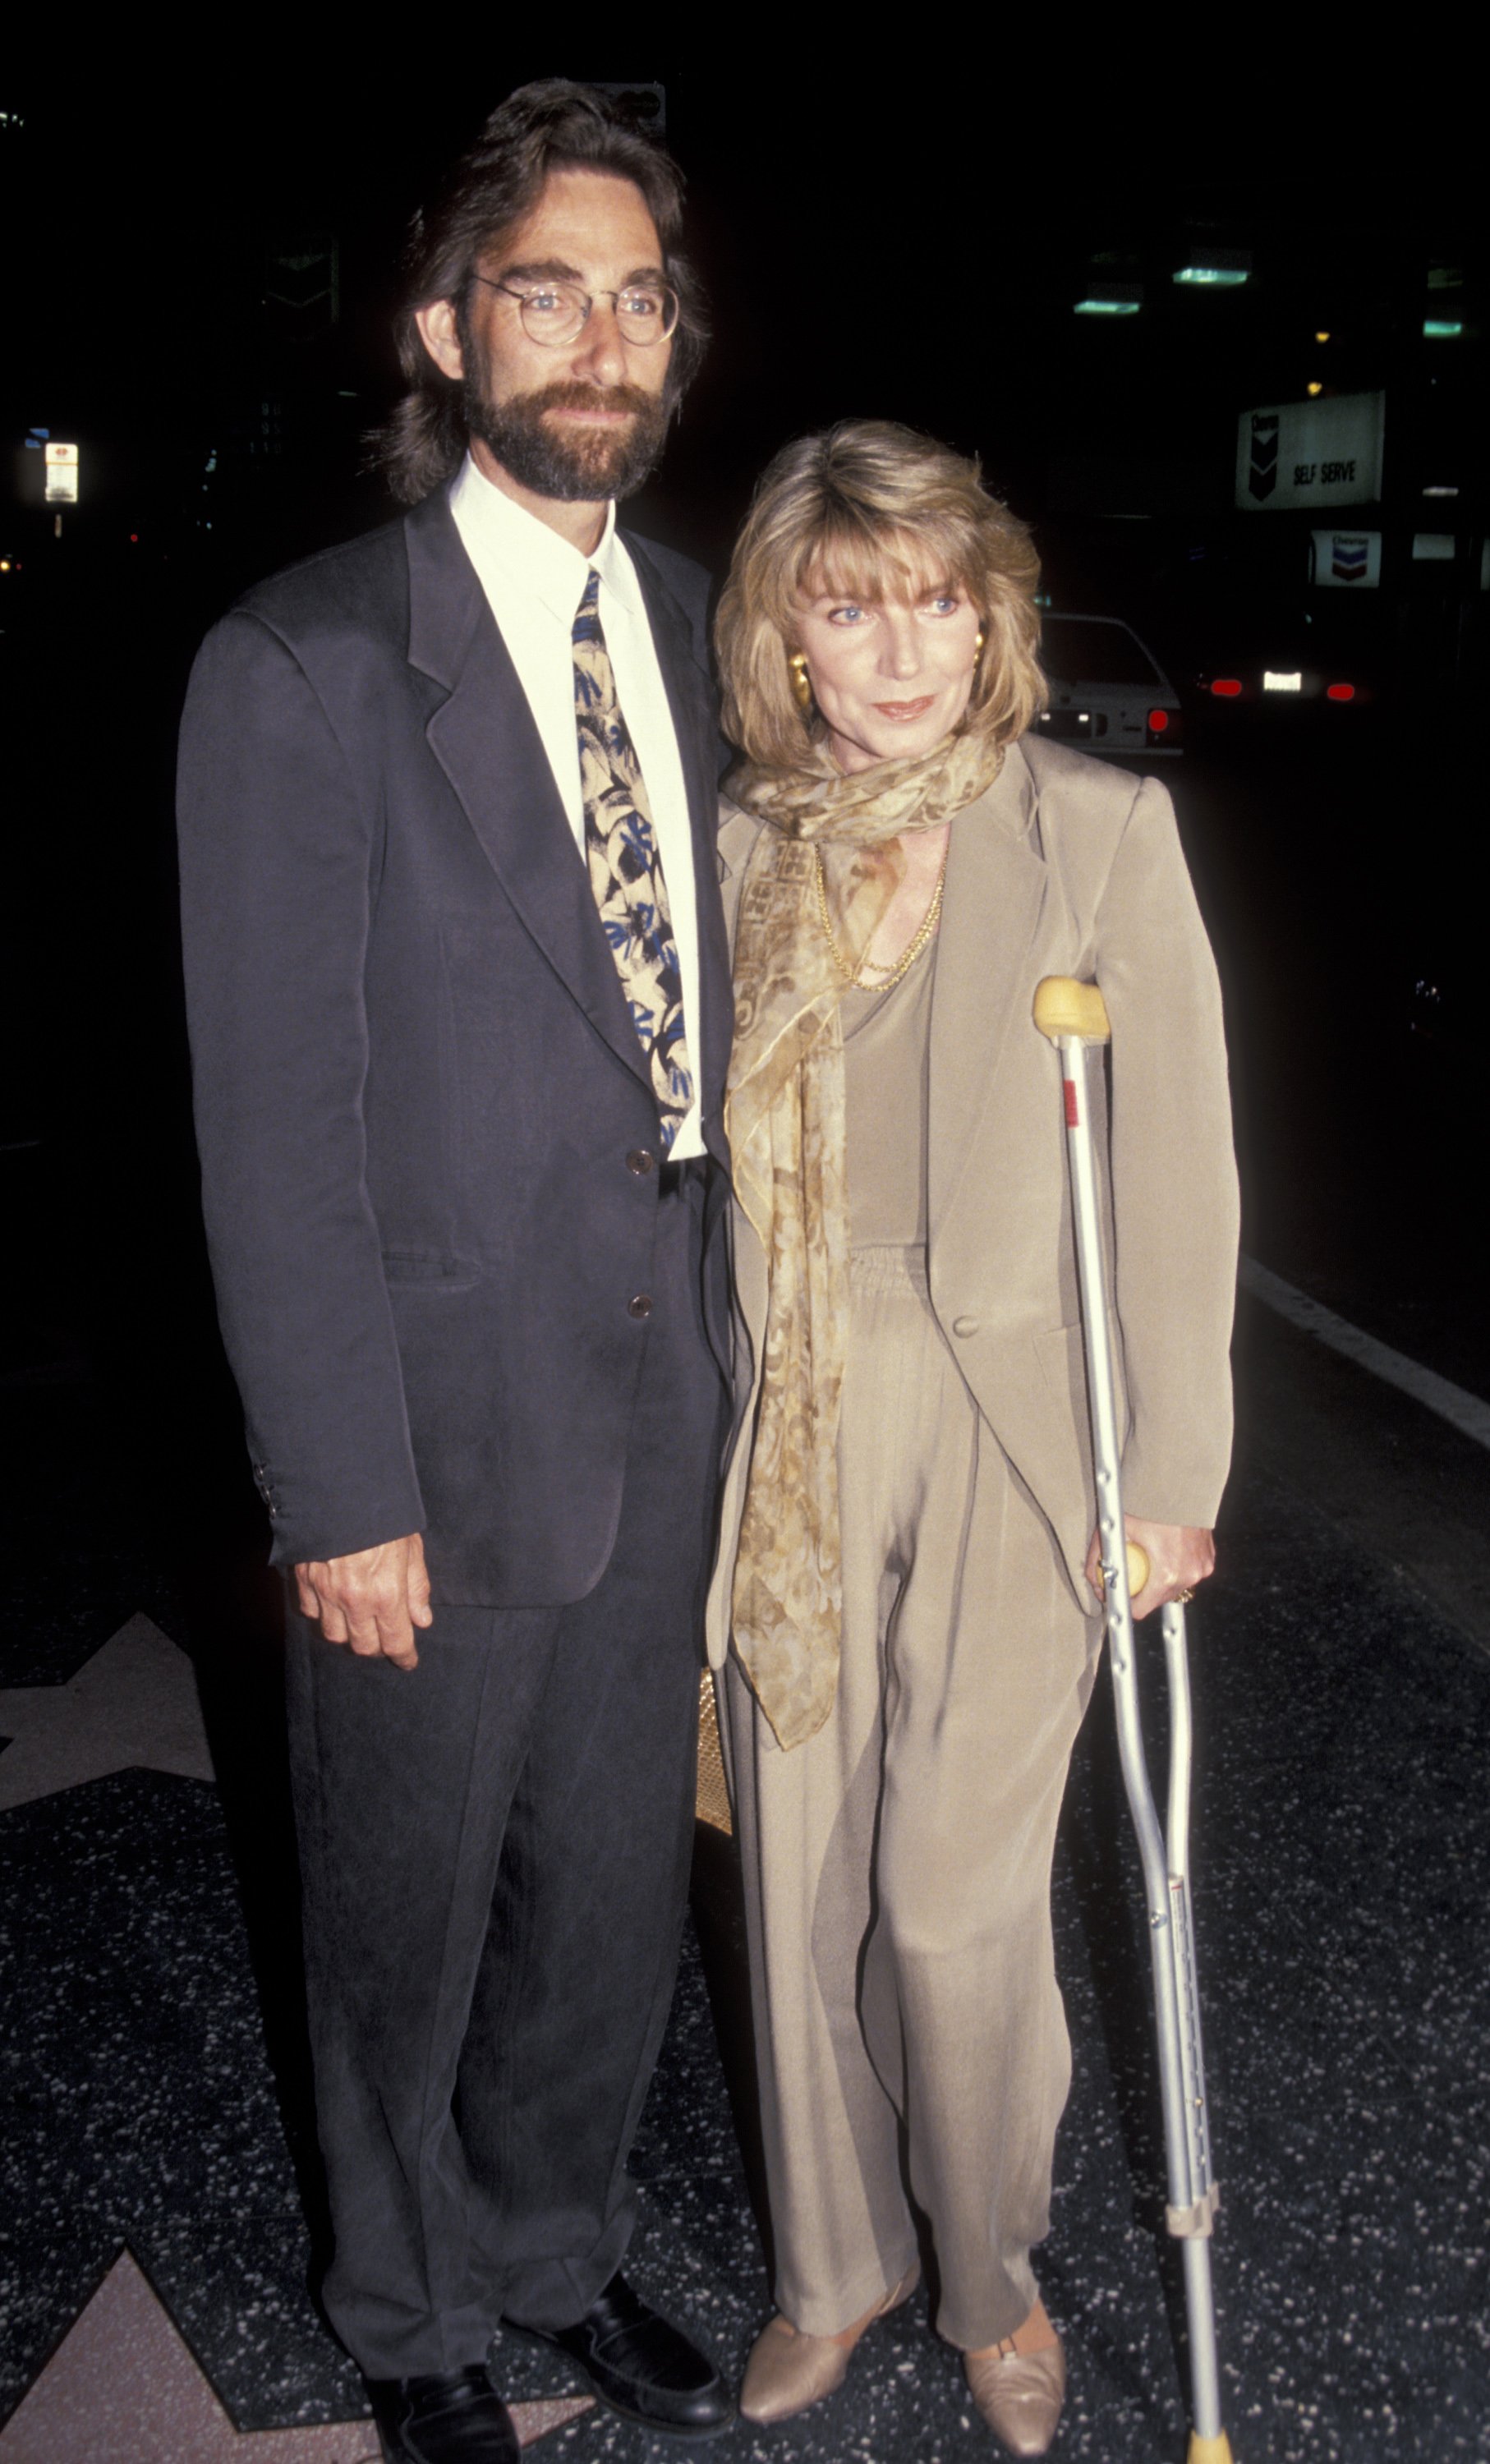 Actress Susan Sullivan and husband Connell Cowan on April 9, 1991 at the Henry Fonda Theater in Hollywood, California. | Source: Getty Images